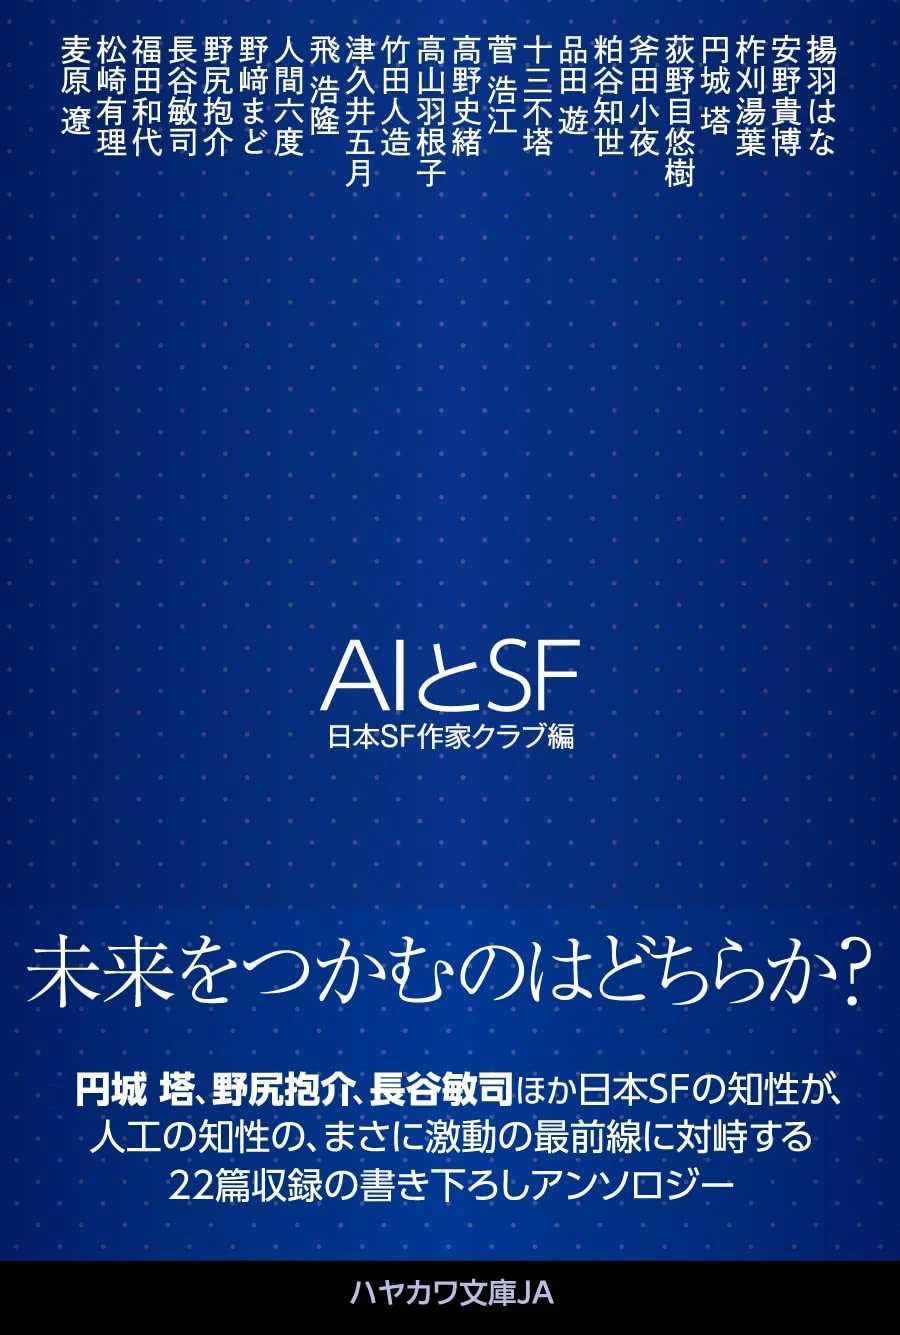 『AIとSF』（画像は<a href="https://amzn.asia/d/gnbVI9o" target="_blank">Amazon</a>より）